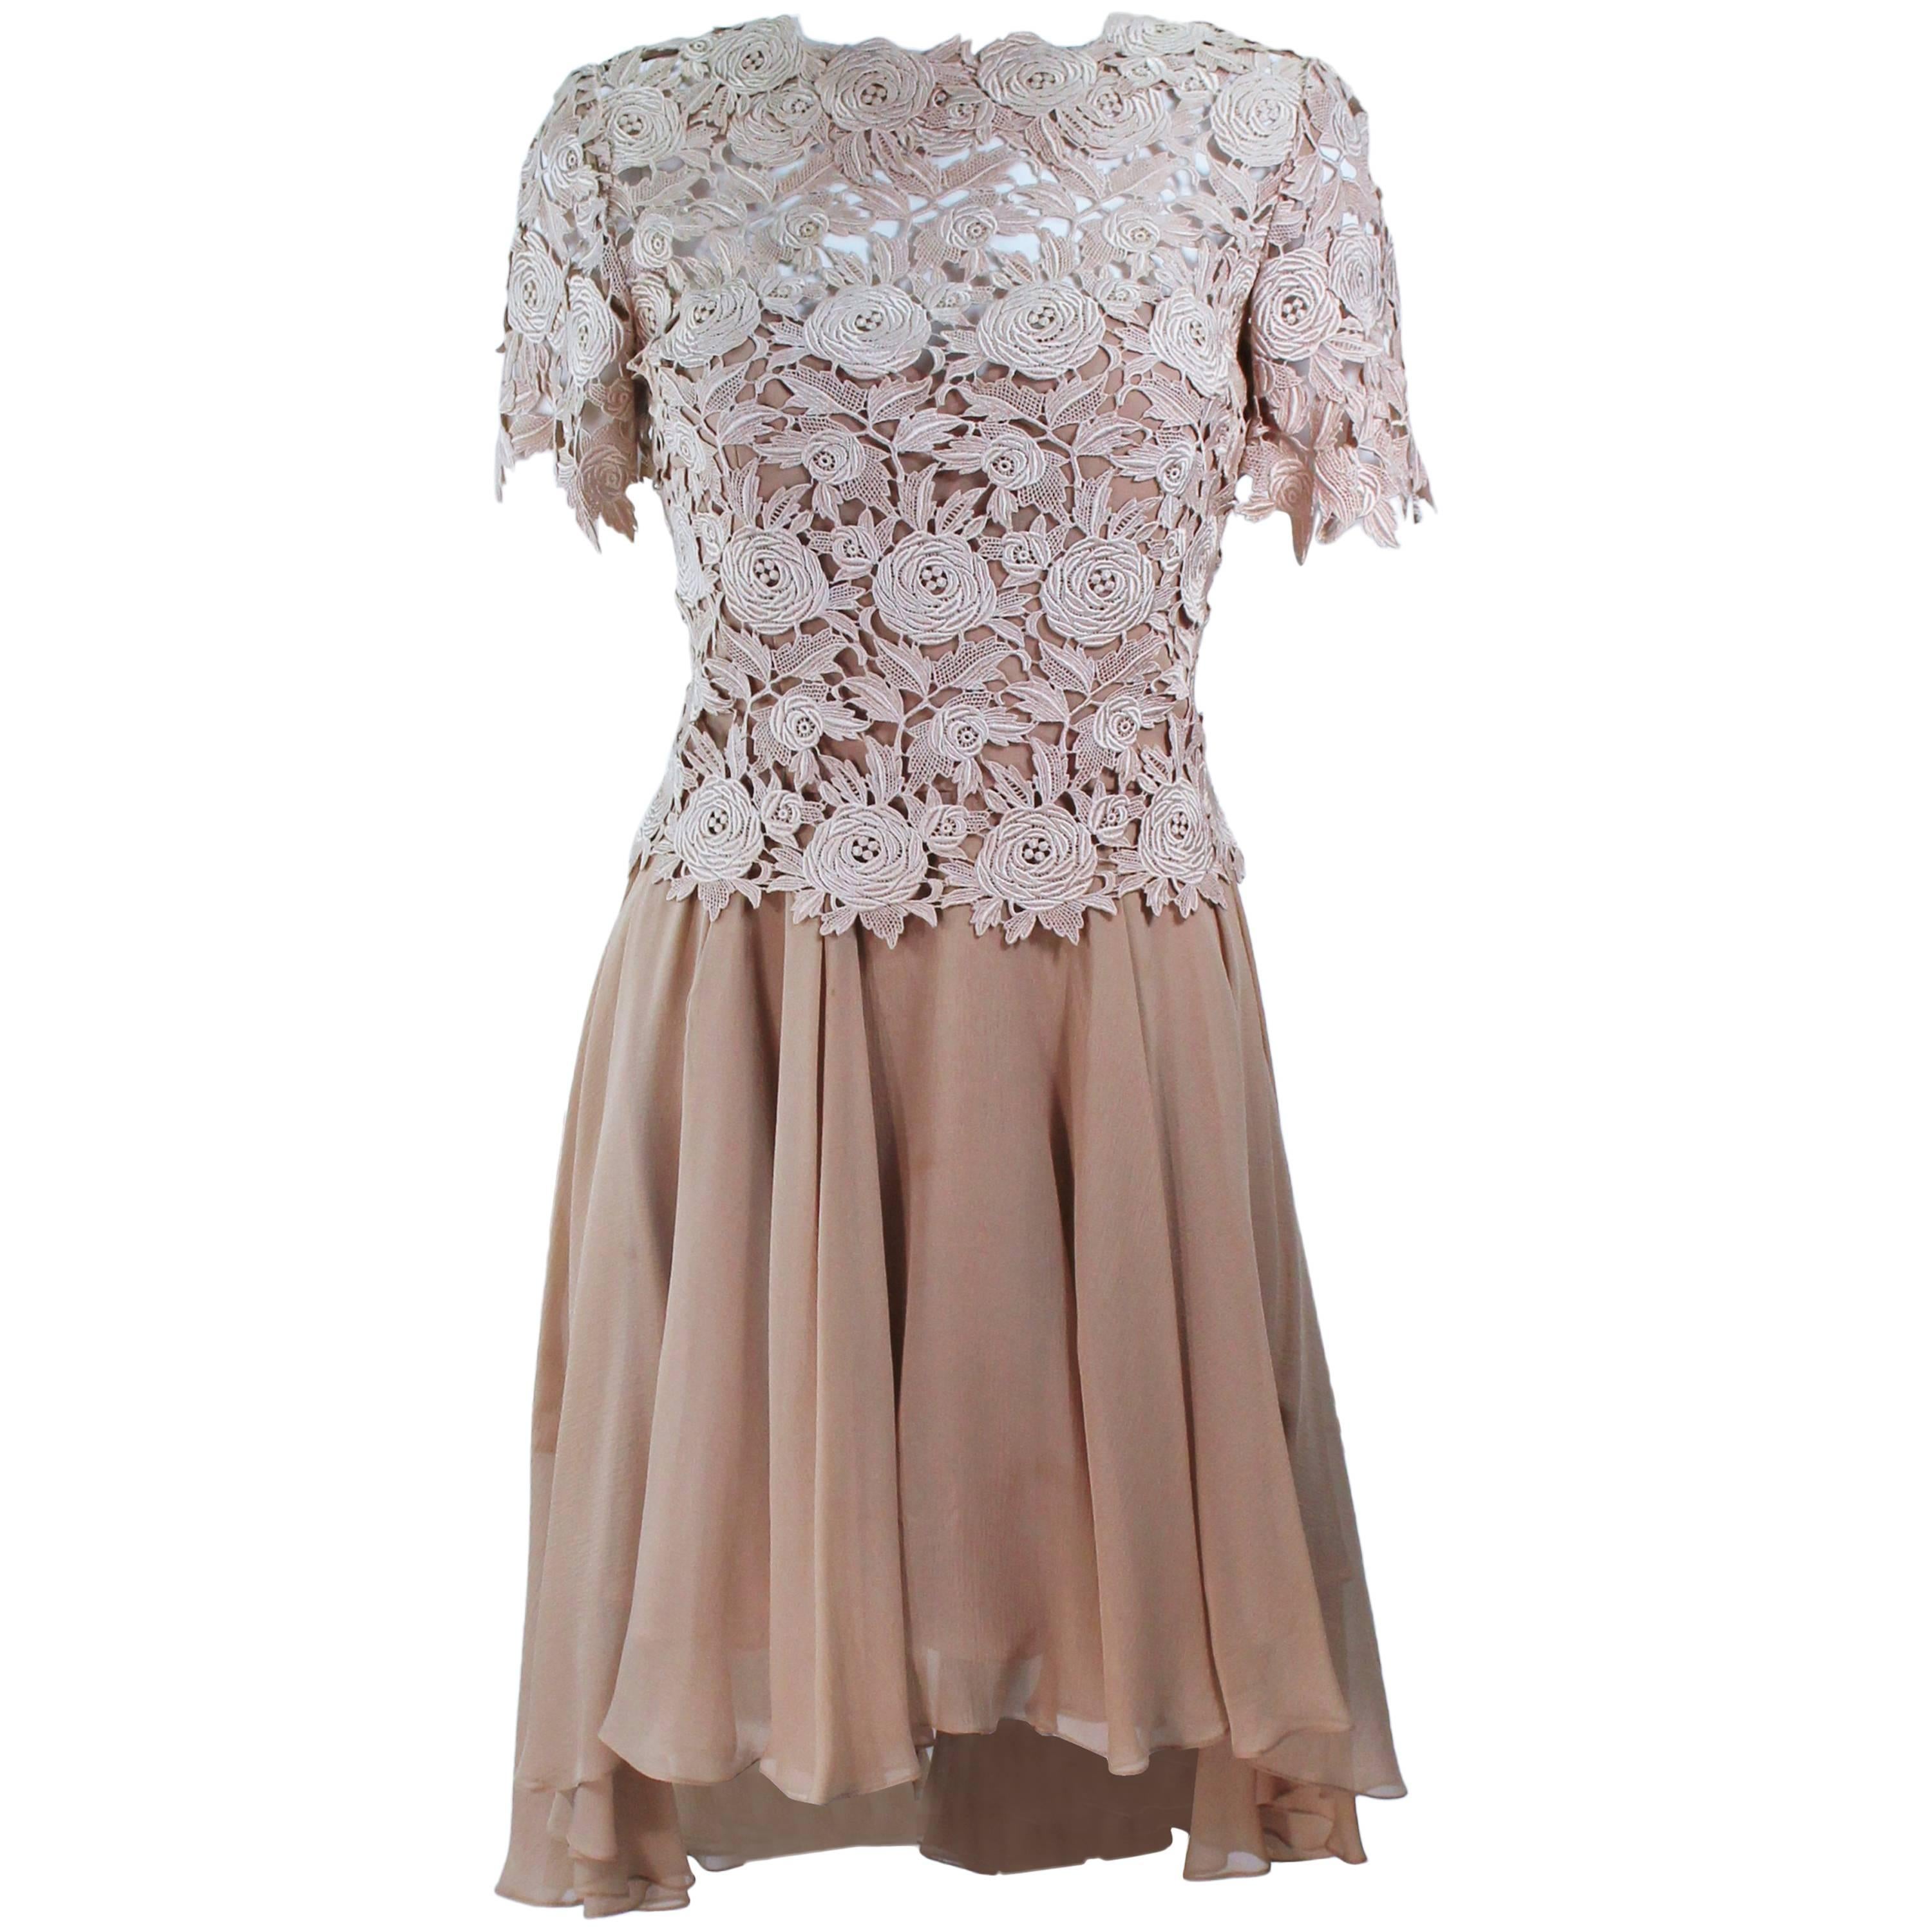 TRAVILLA Floral Lace Cocktail Dress with Chiffon Skirt Size 4 6